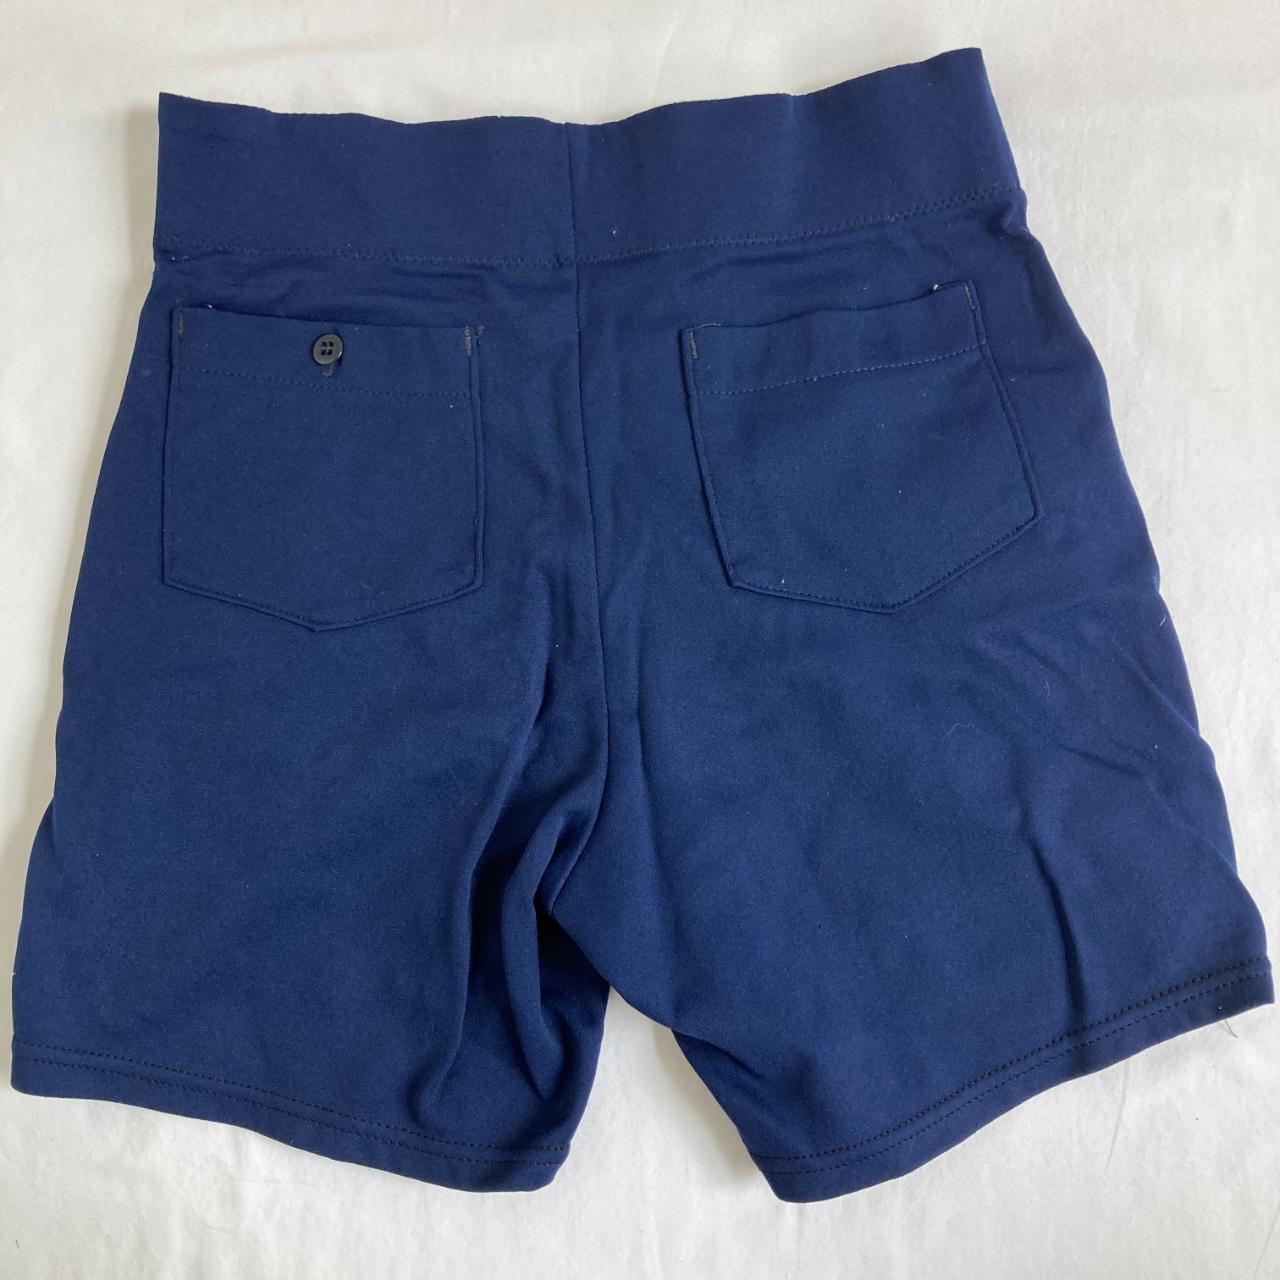 Vintage 80s Southern Athletic Coach's Shorts | 100%... - Depop